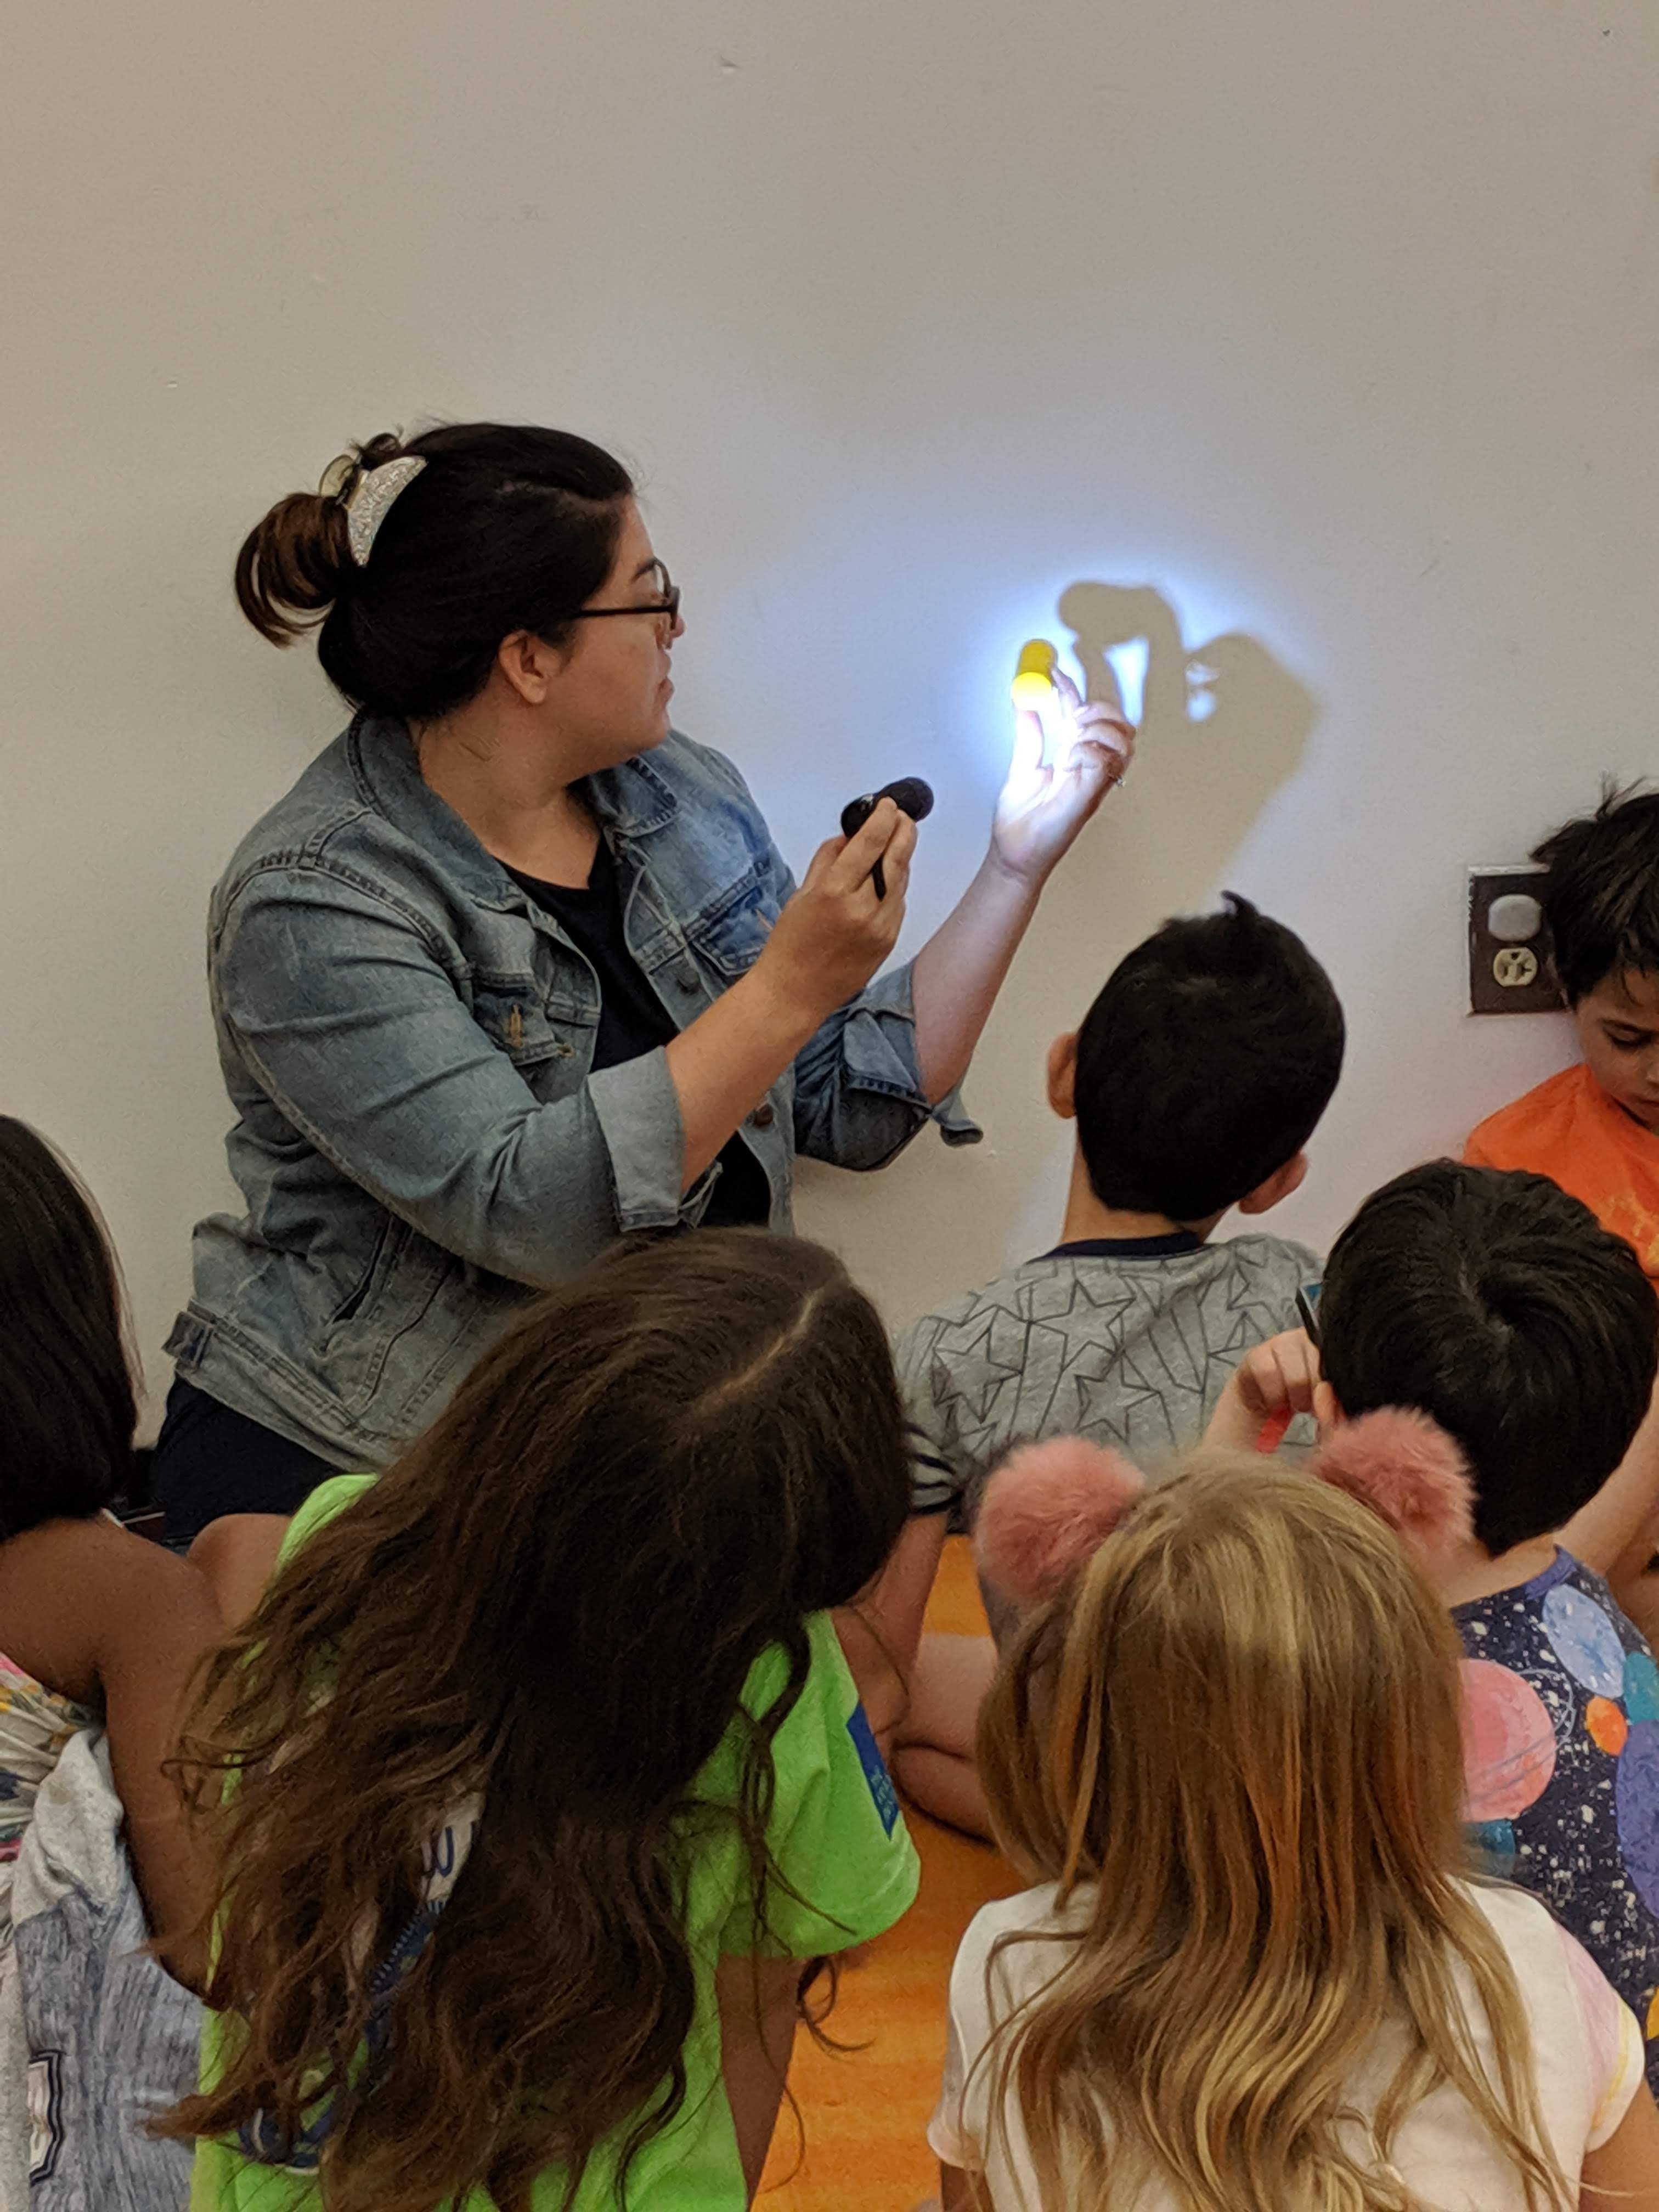 Preschool instructor demonstrating how to make a shadow using a flashlight and toy.